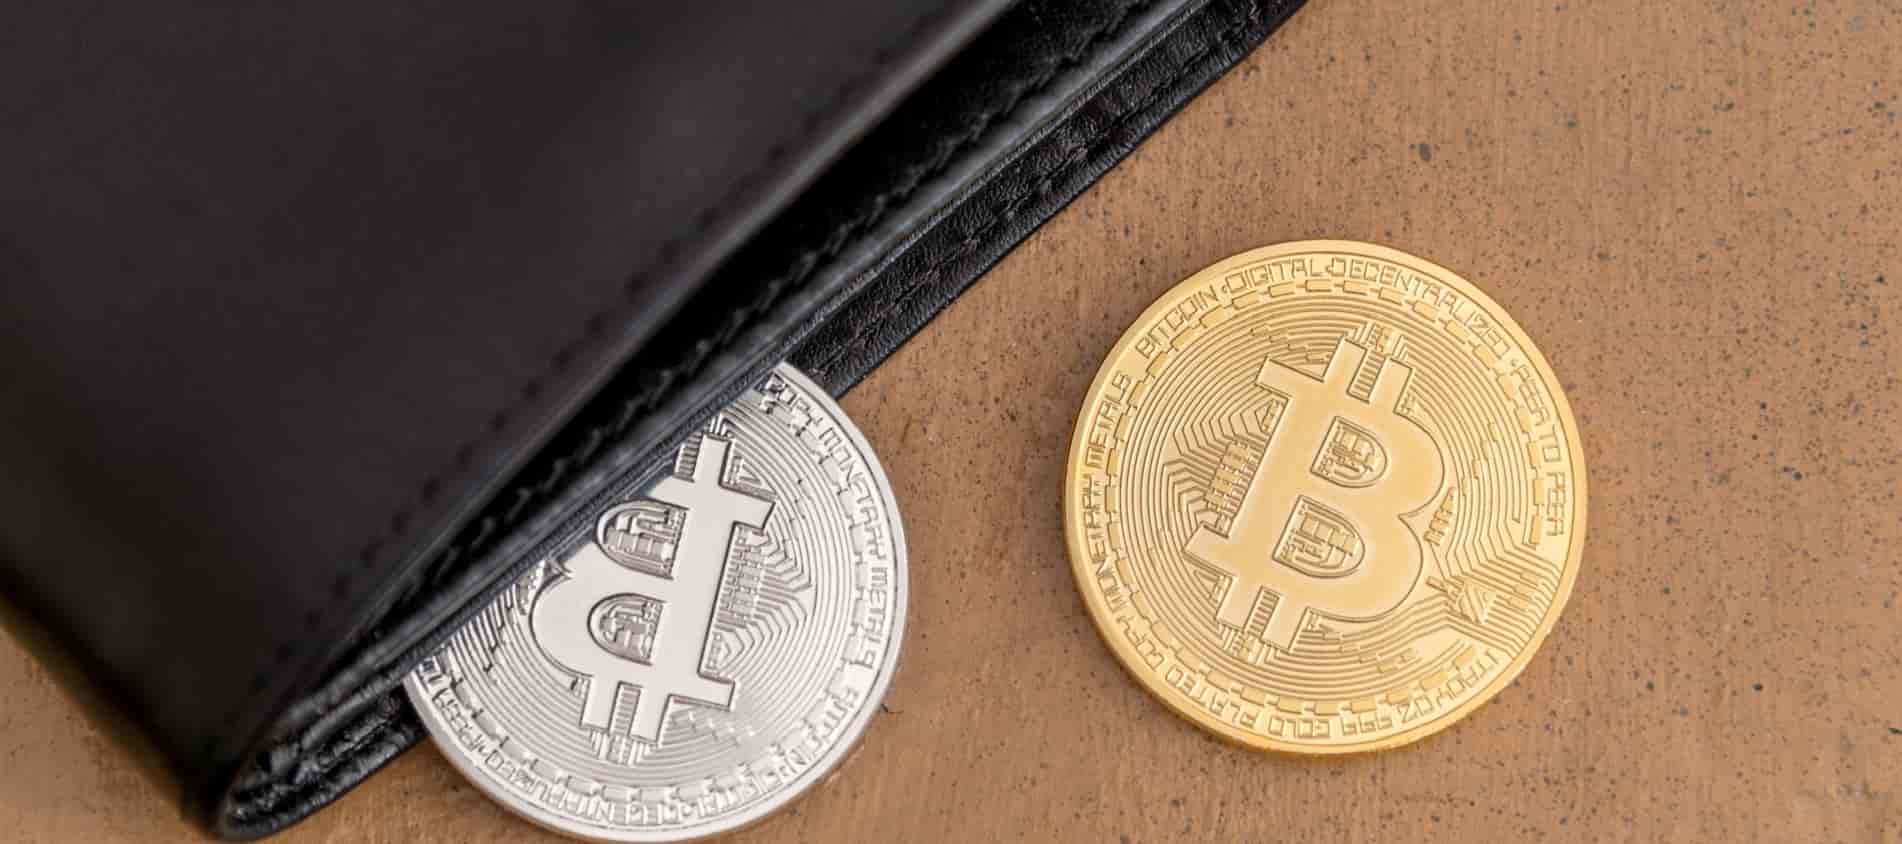 Best Crypto Wallets: Top 10 Bitcoin Wallet Apps for 2021 ...